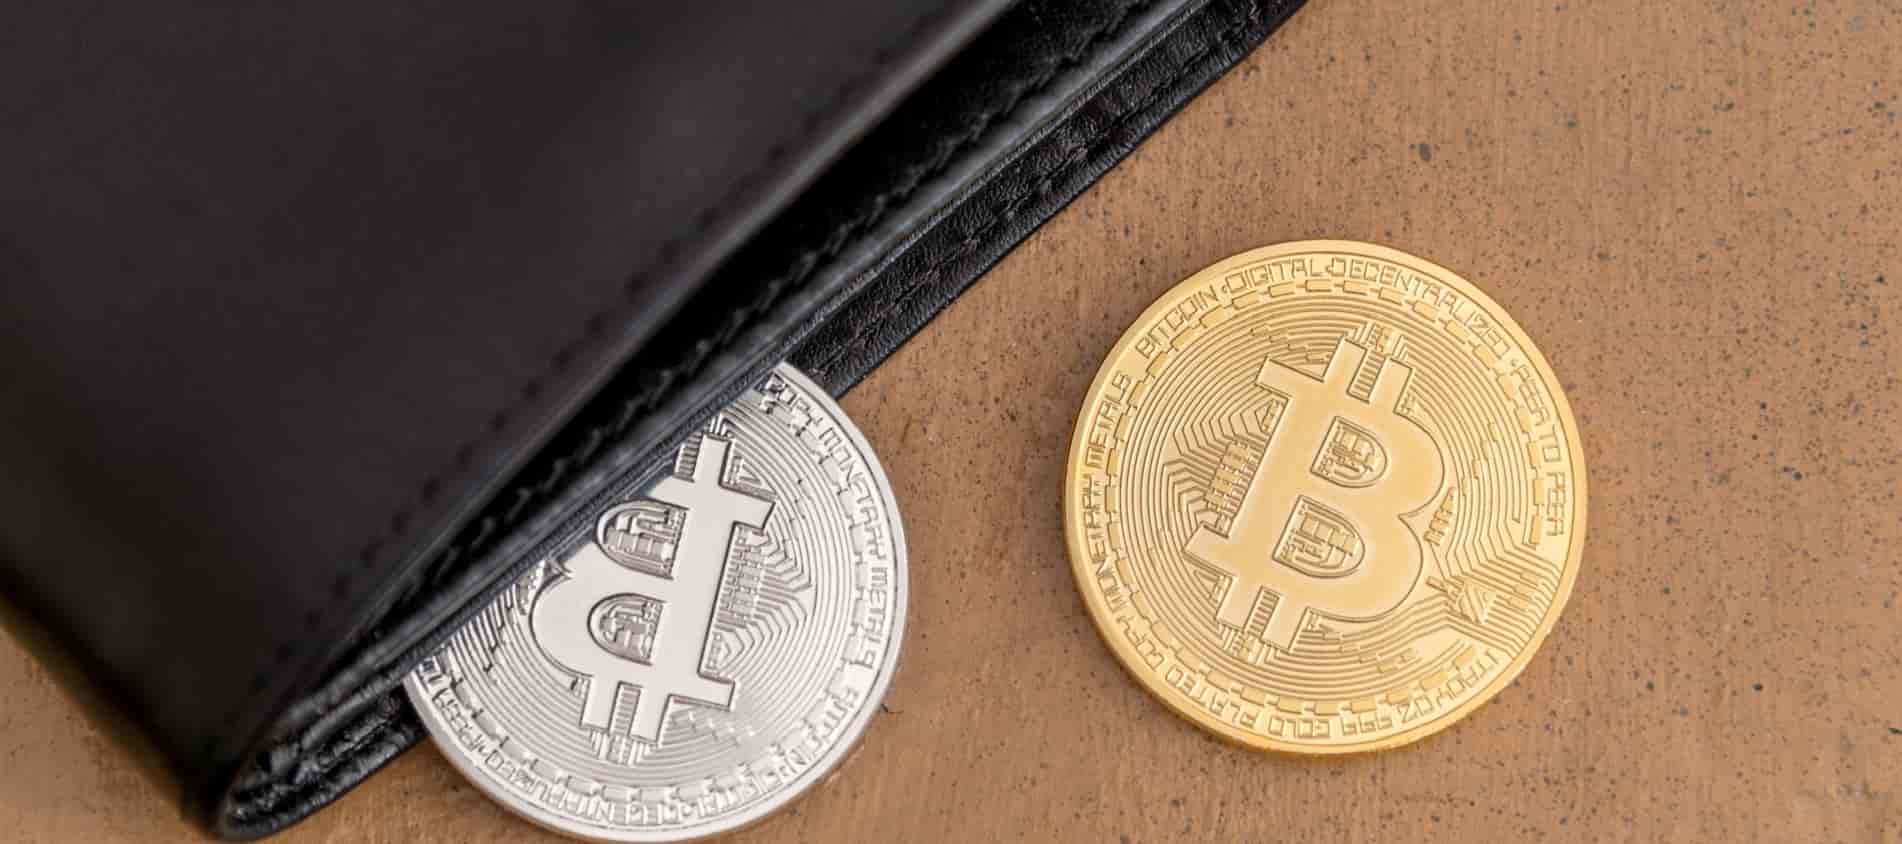 Best Crypto Wallets: Top 10 Bitcoin Wallet Apps for 2021 ...